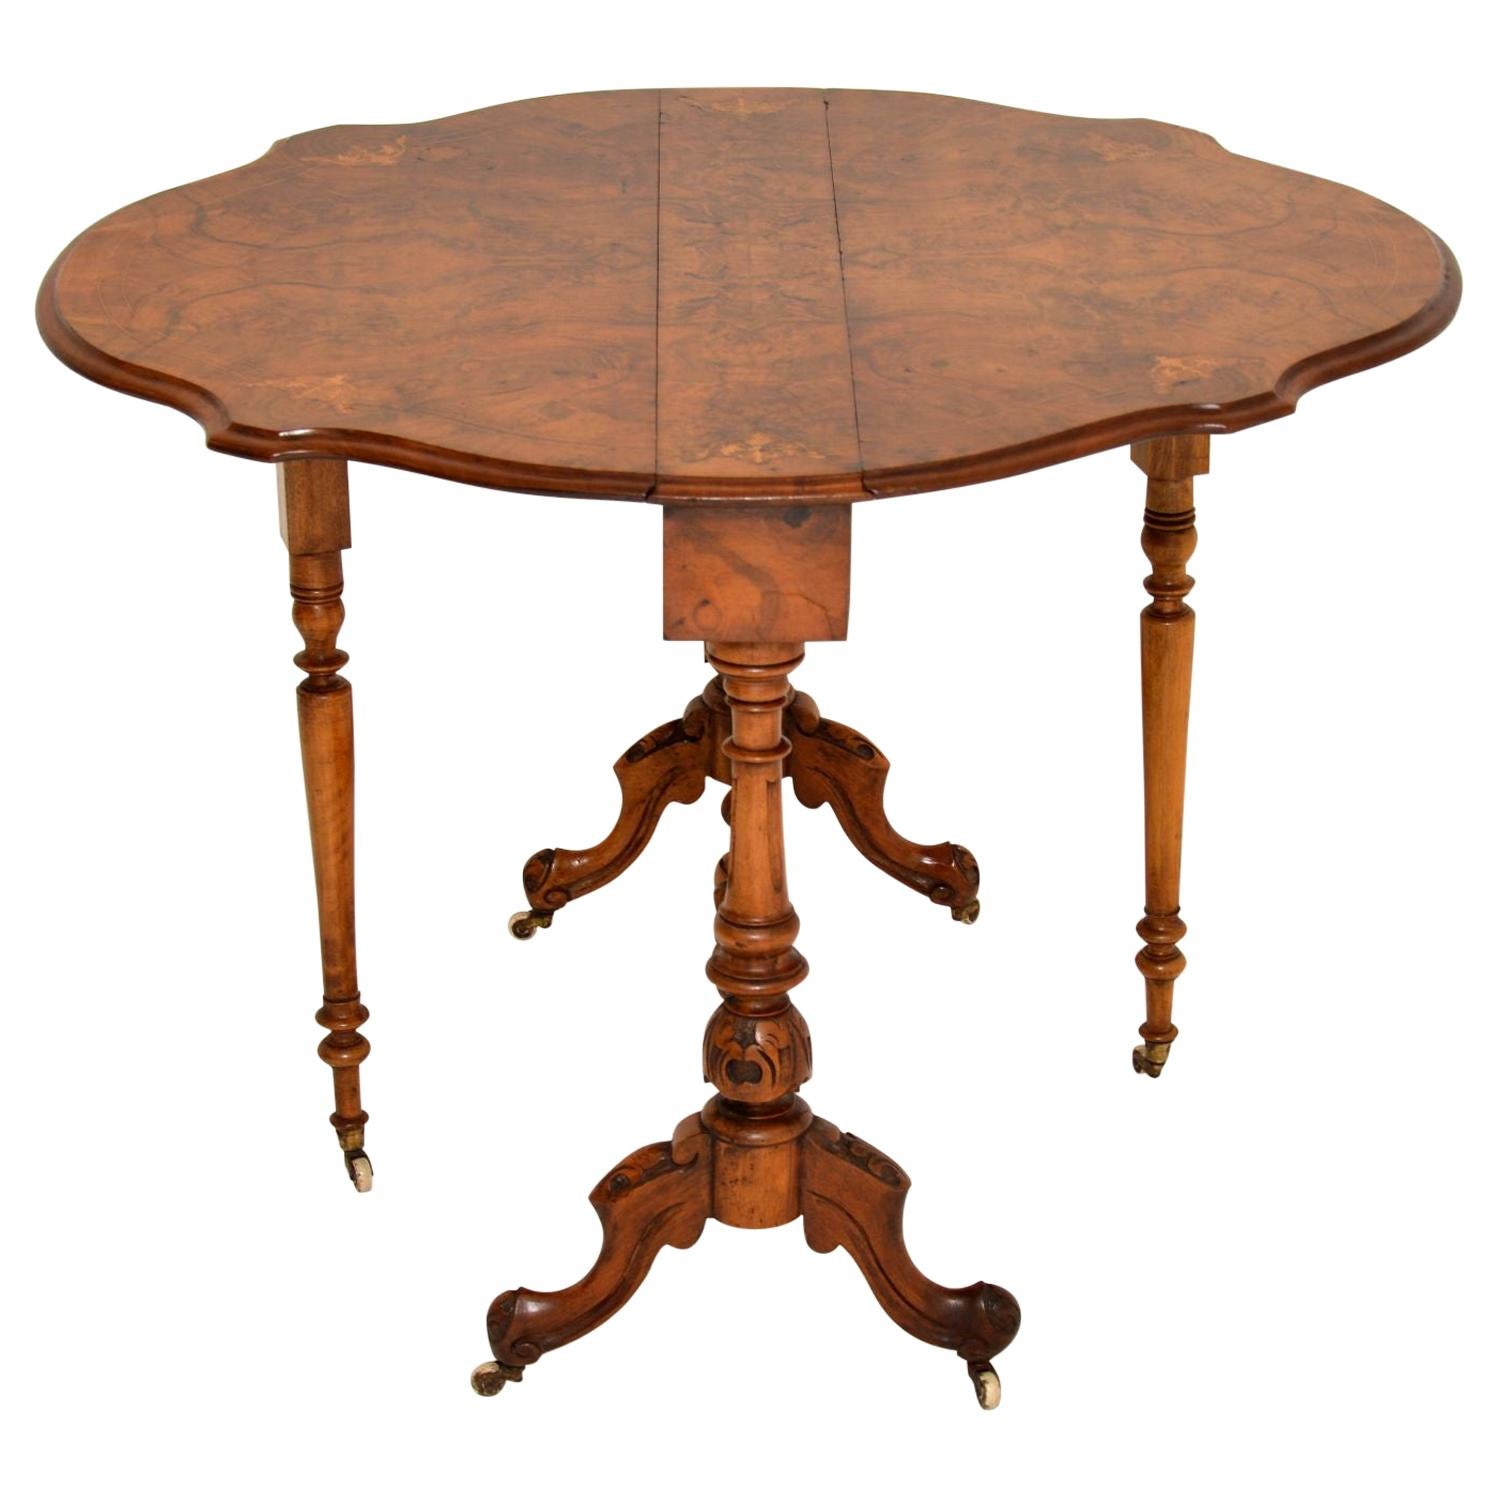 This is one of the nicest antique Sutherland tables I’ve had and it’s in excellent original condition, with a lovely warm color and dating to circa 1860s period.

It has a shaped burr walnut top which has beautiful patterns and is nicely inlaid